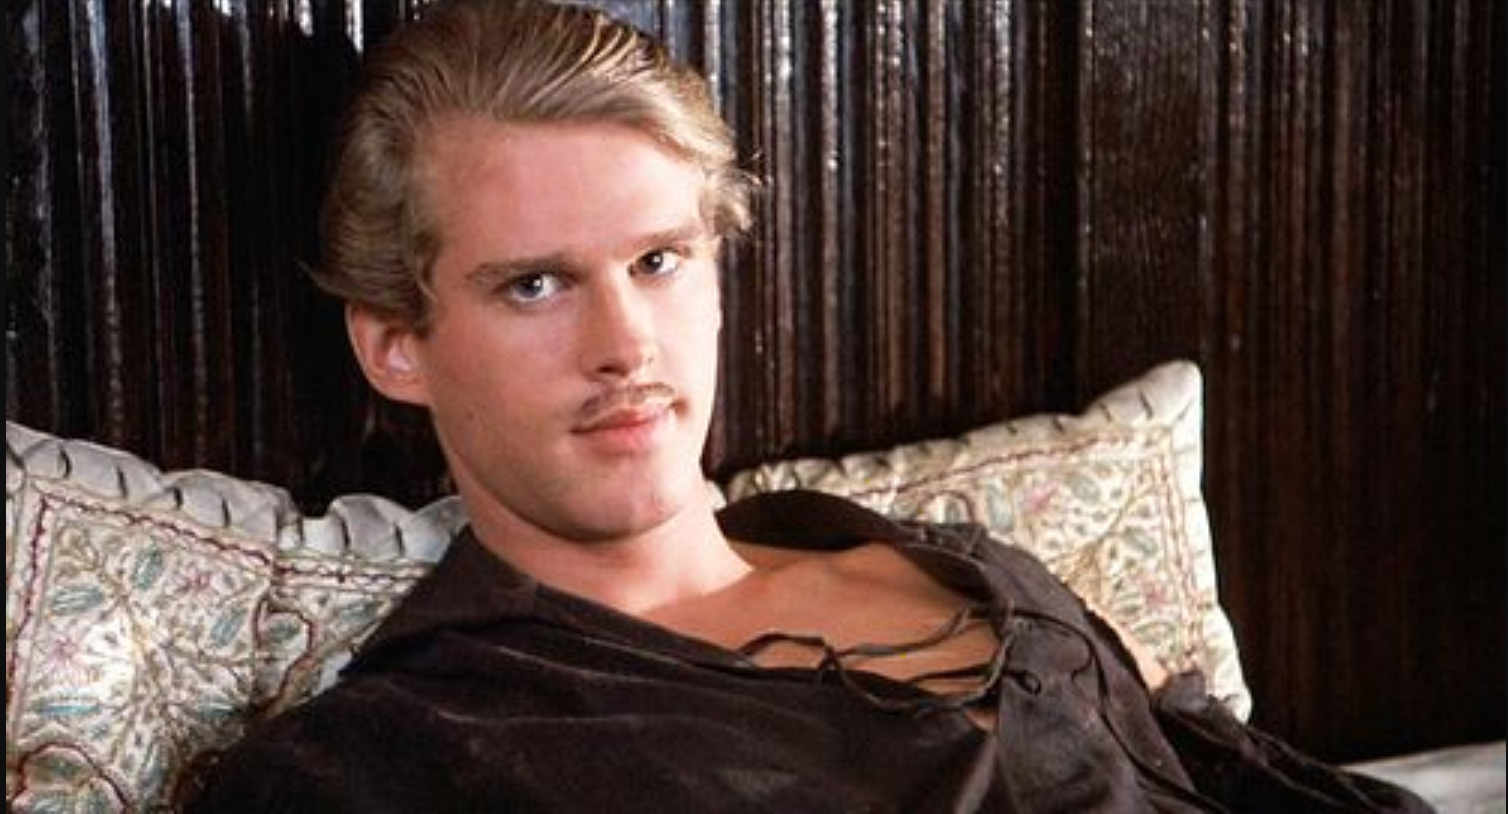 In the 1987 film, Cary Elwes gave an unforgettable performance as the farmb...